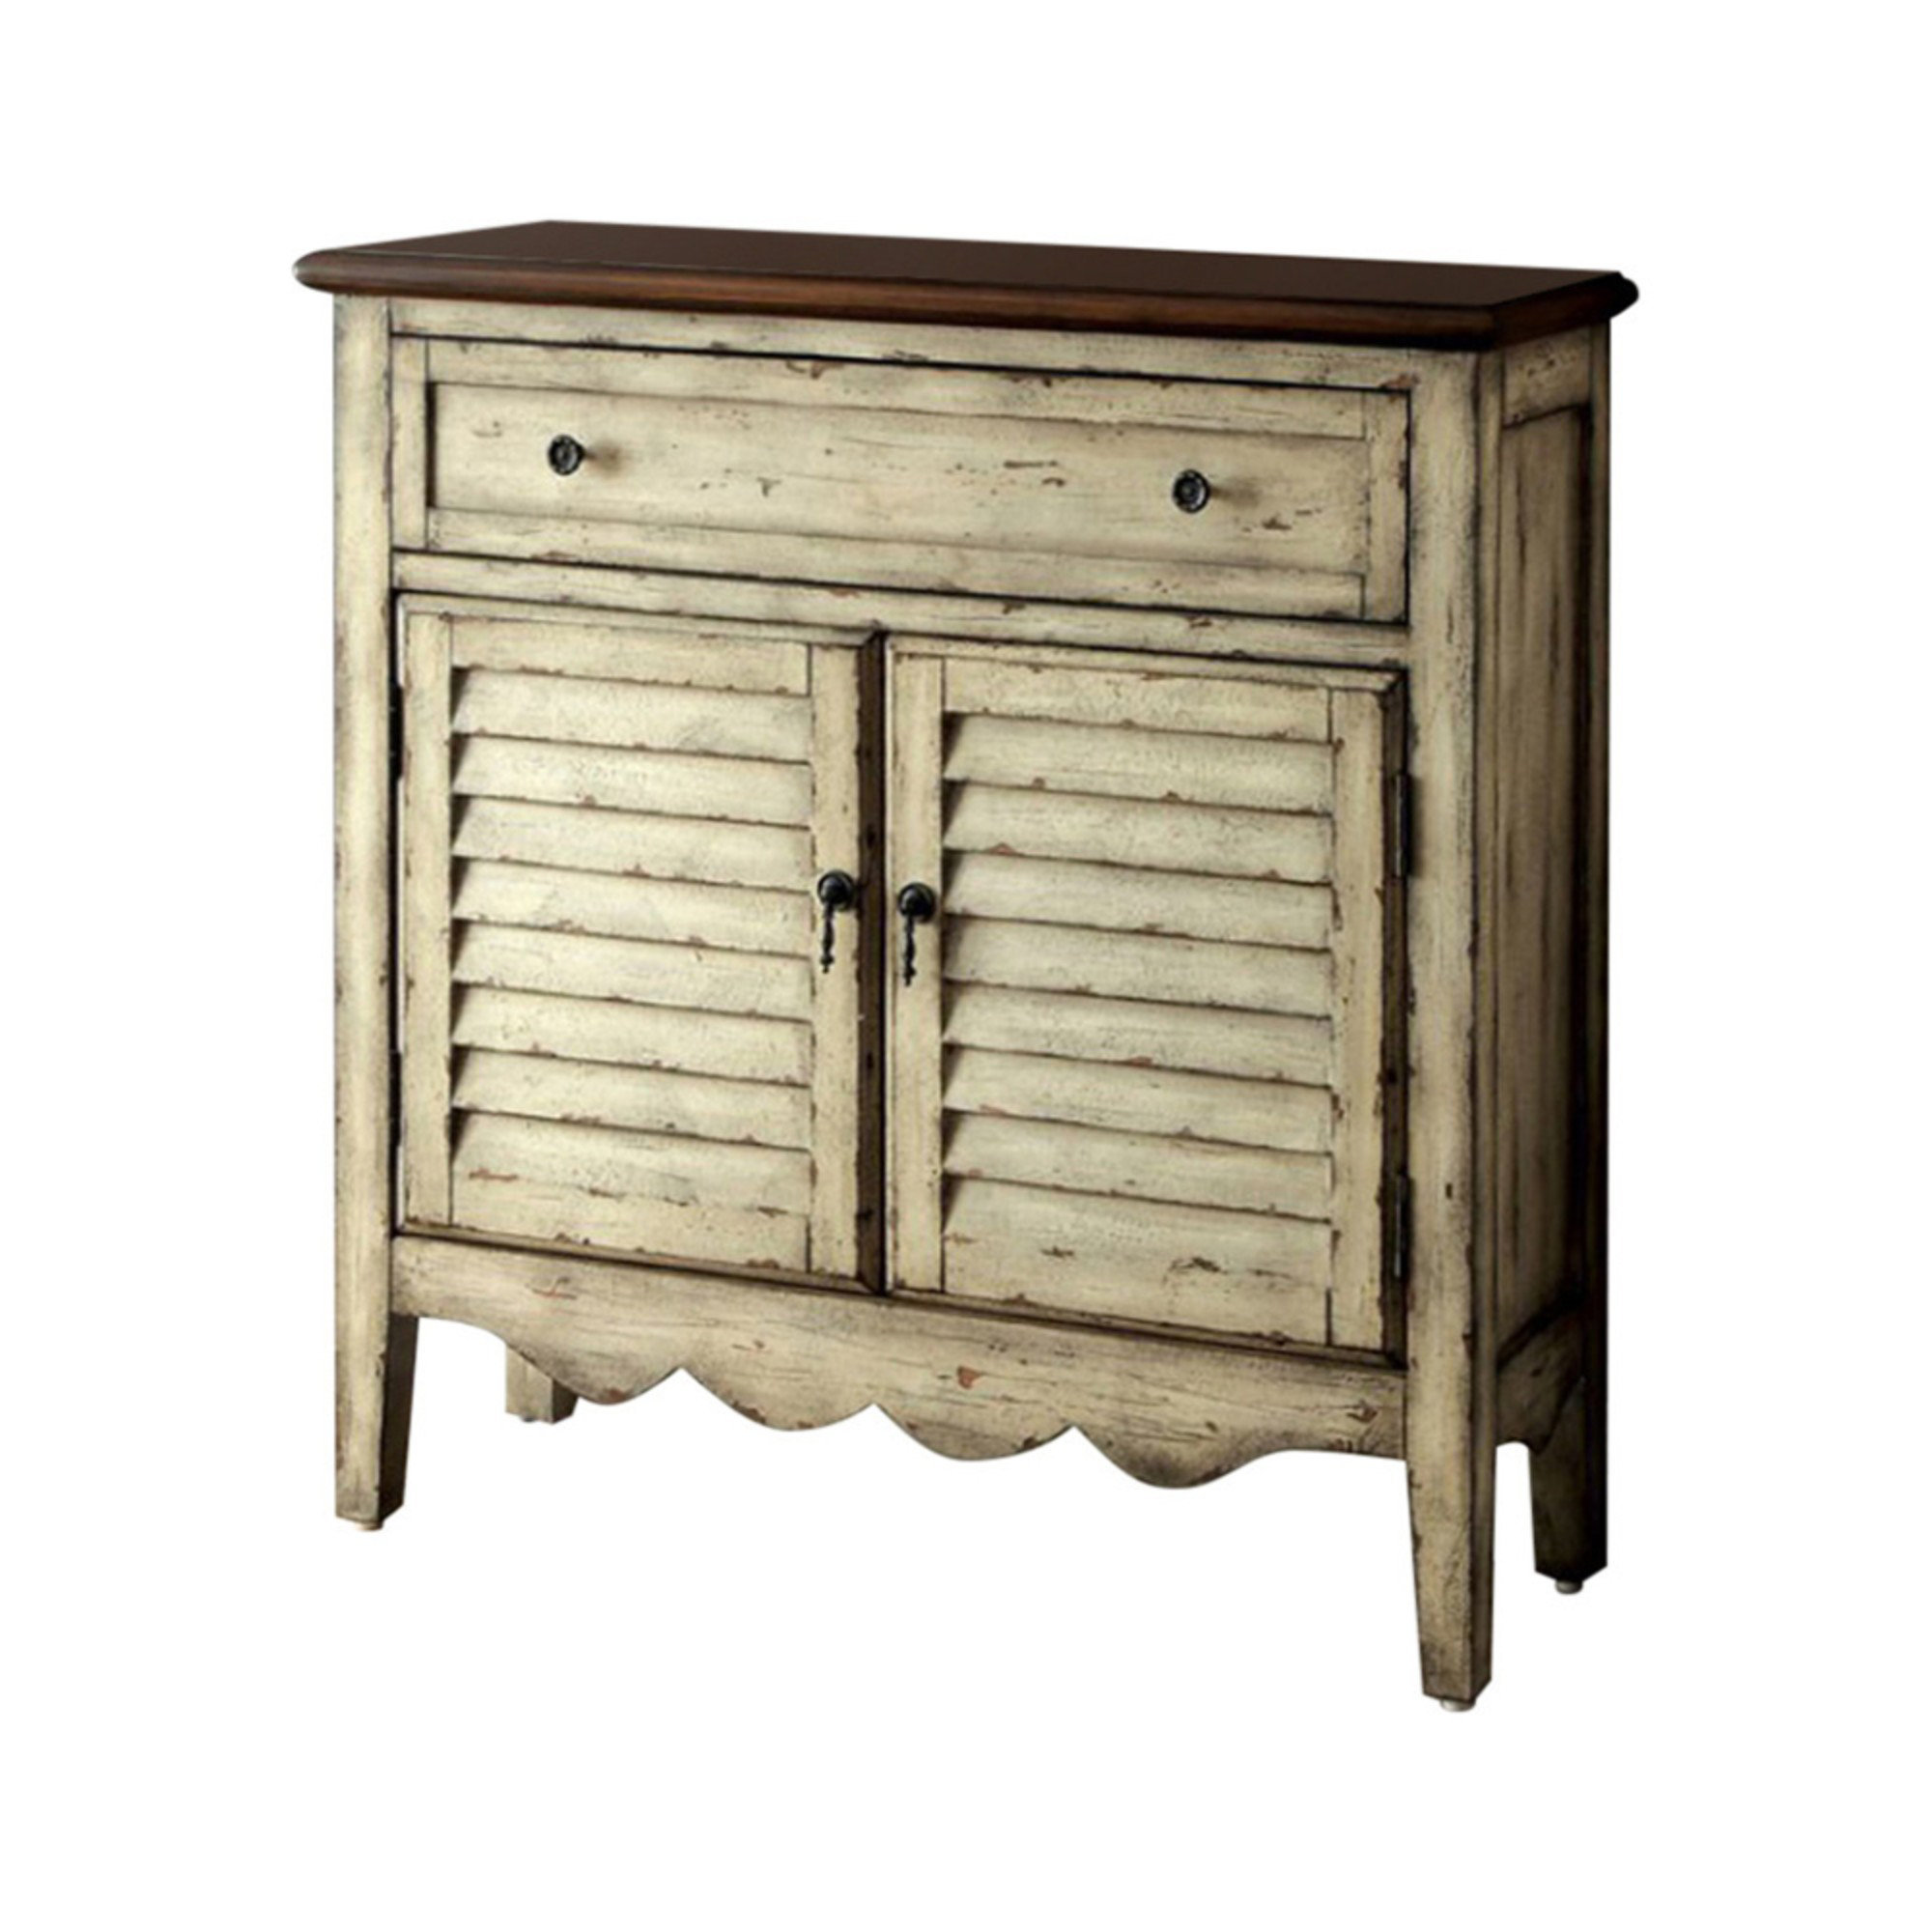 August Grove Haskell Country Accent Cabinet Wayfair